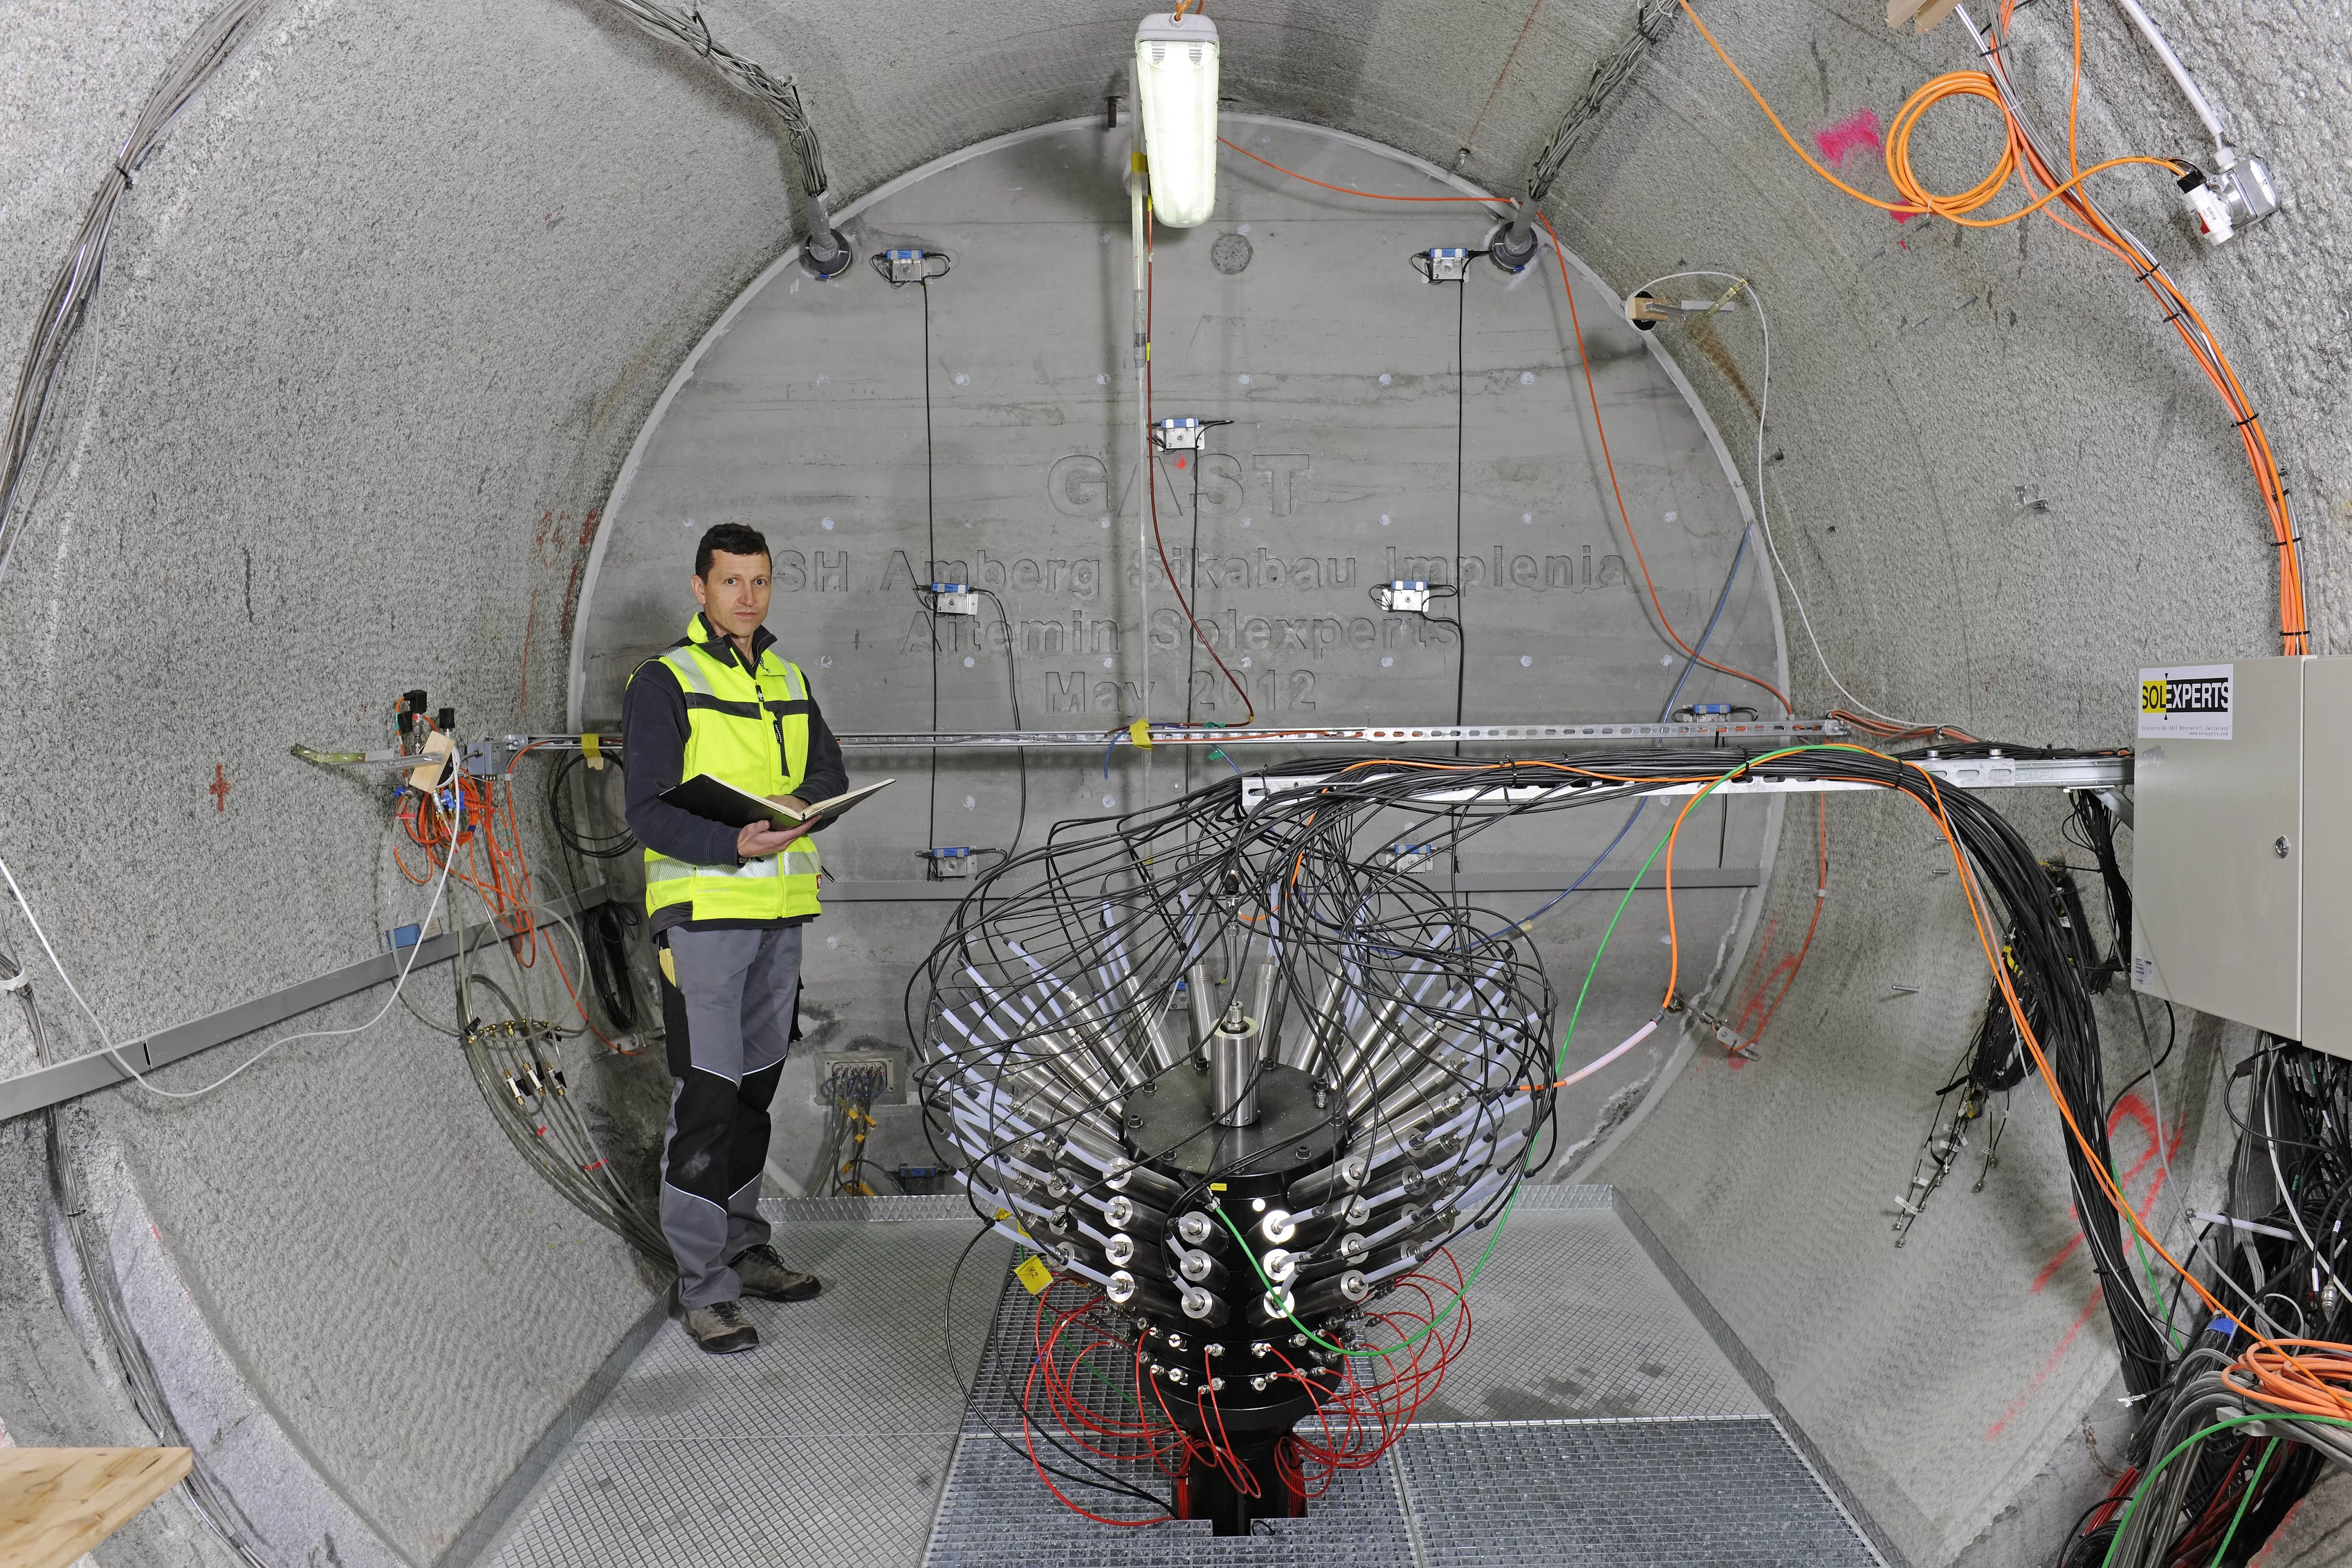 GAST Experiment: testing a gas-permeable sealing structure of a repository tunnel for radioactive waste. Photo: © Comet Photoshopping, Dieter Enz